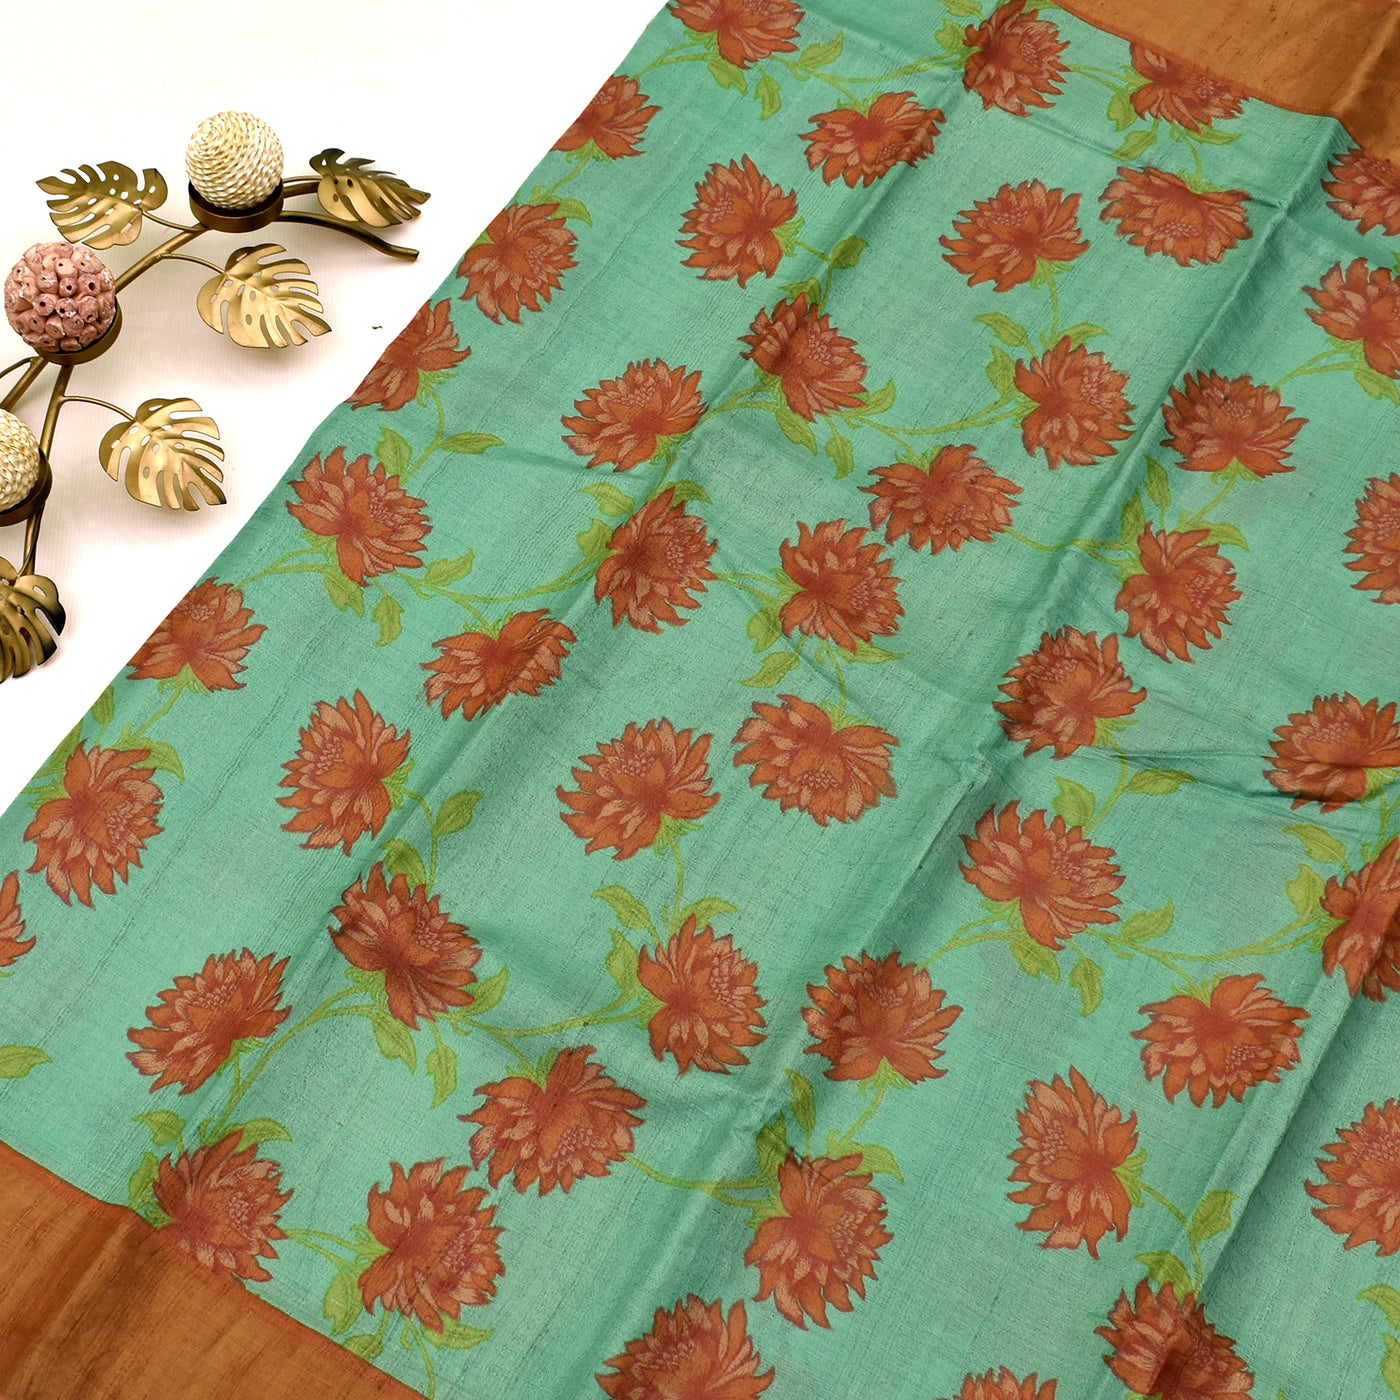 Apple Green Tussar Printed Saree with floral design